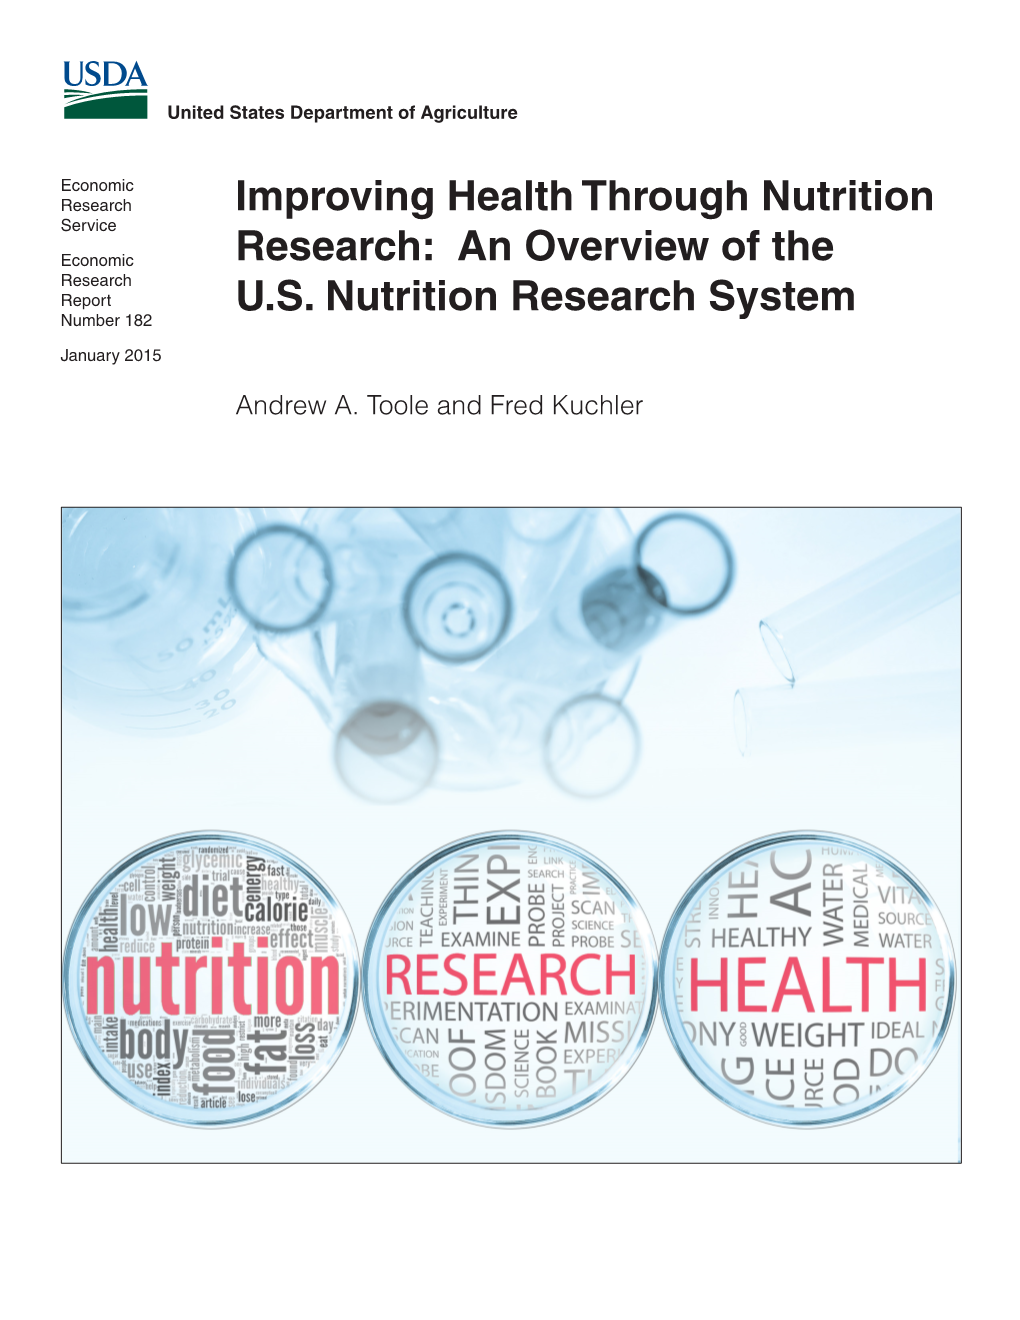 Improving Health Through Nutrition Research: an Overview of the U.S